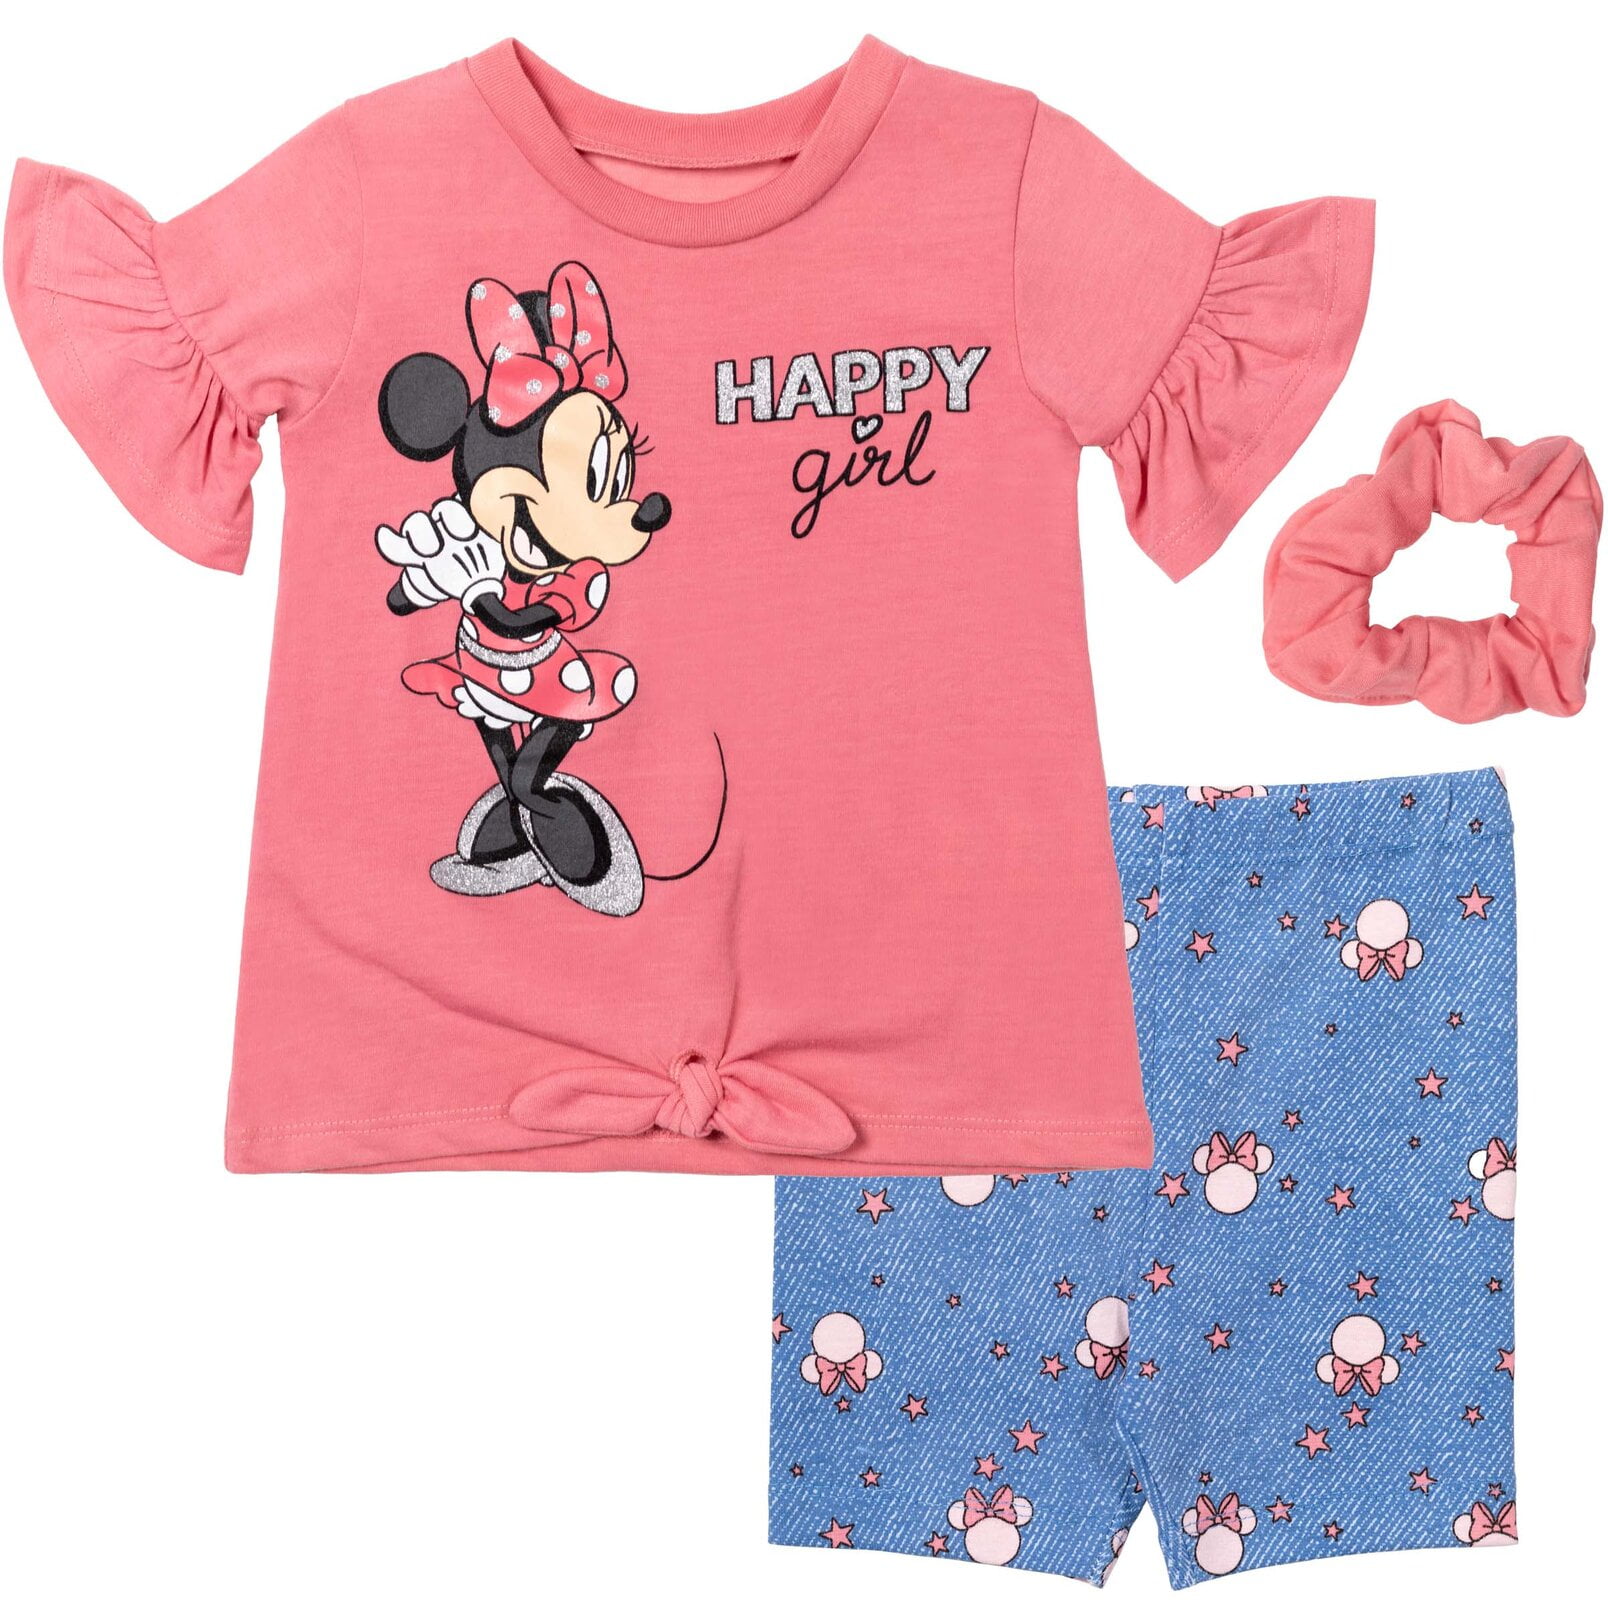 Disney Minnie Mouse Toddler Girls 3 Piece Outfit Set: T-Shirt Shorts ...